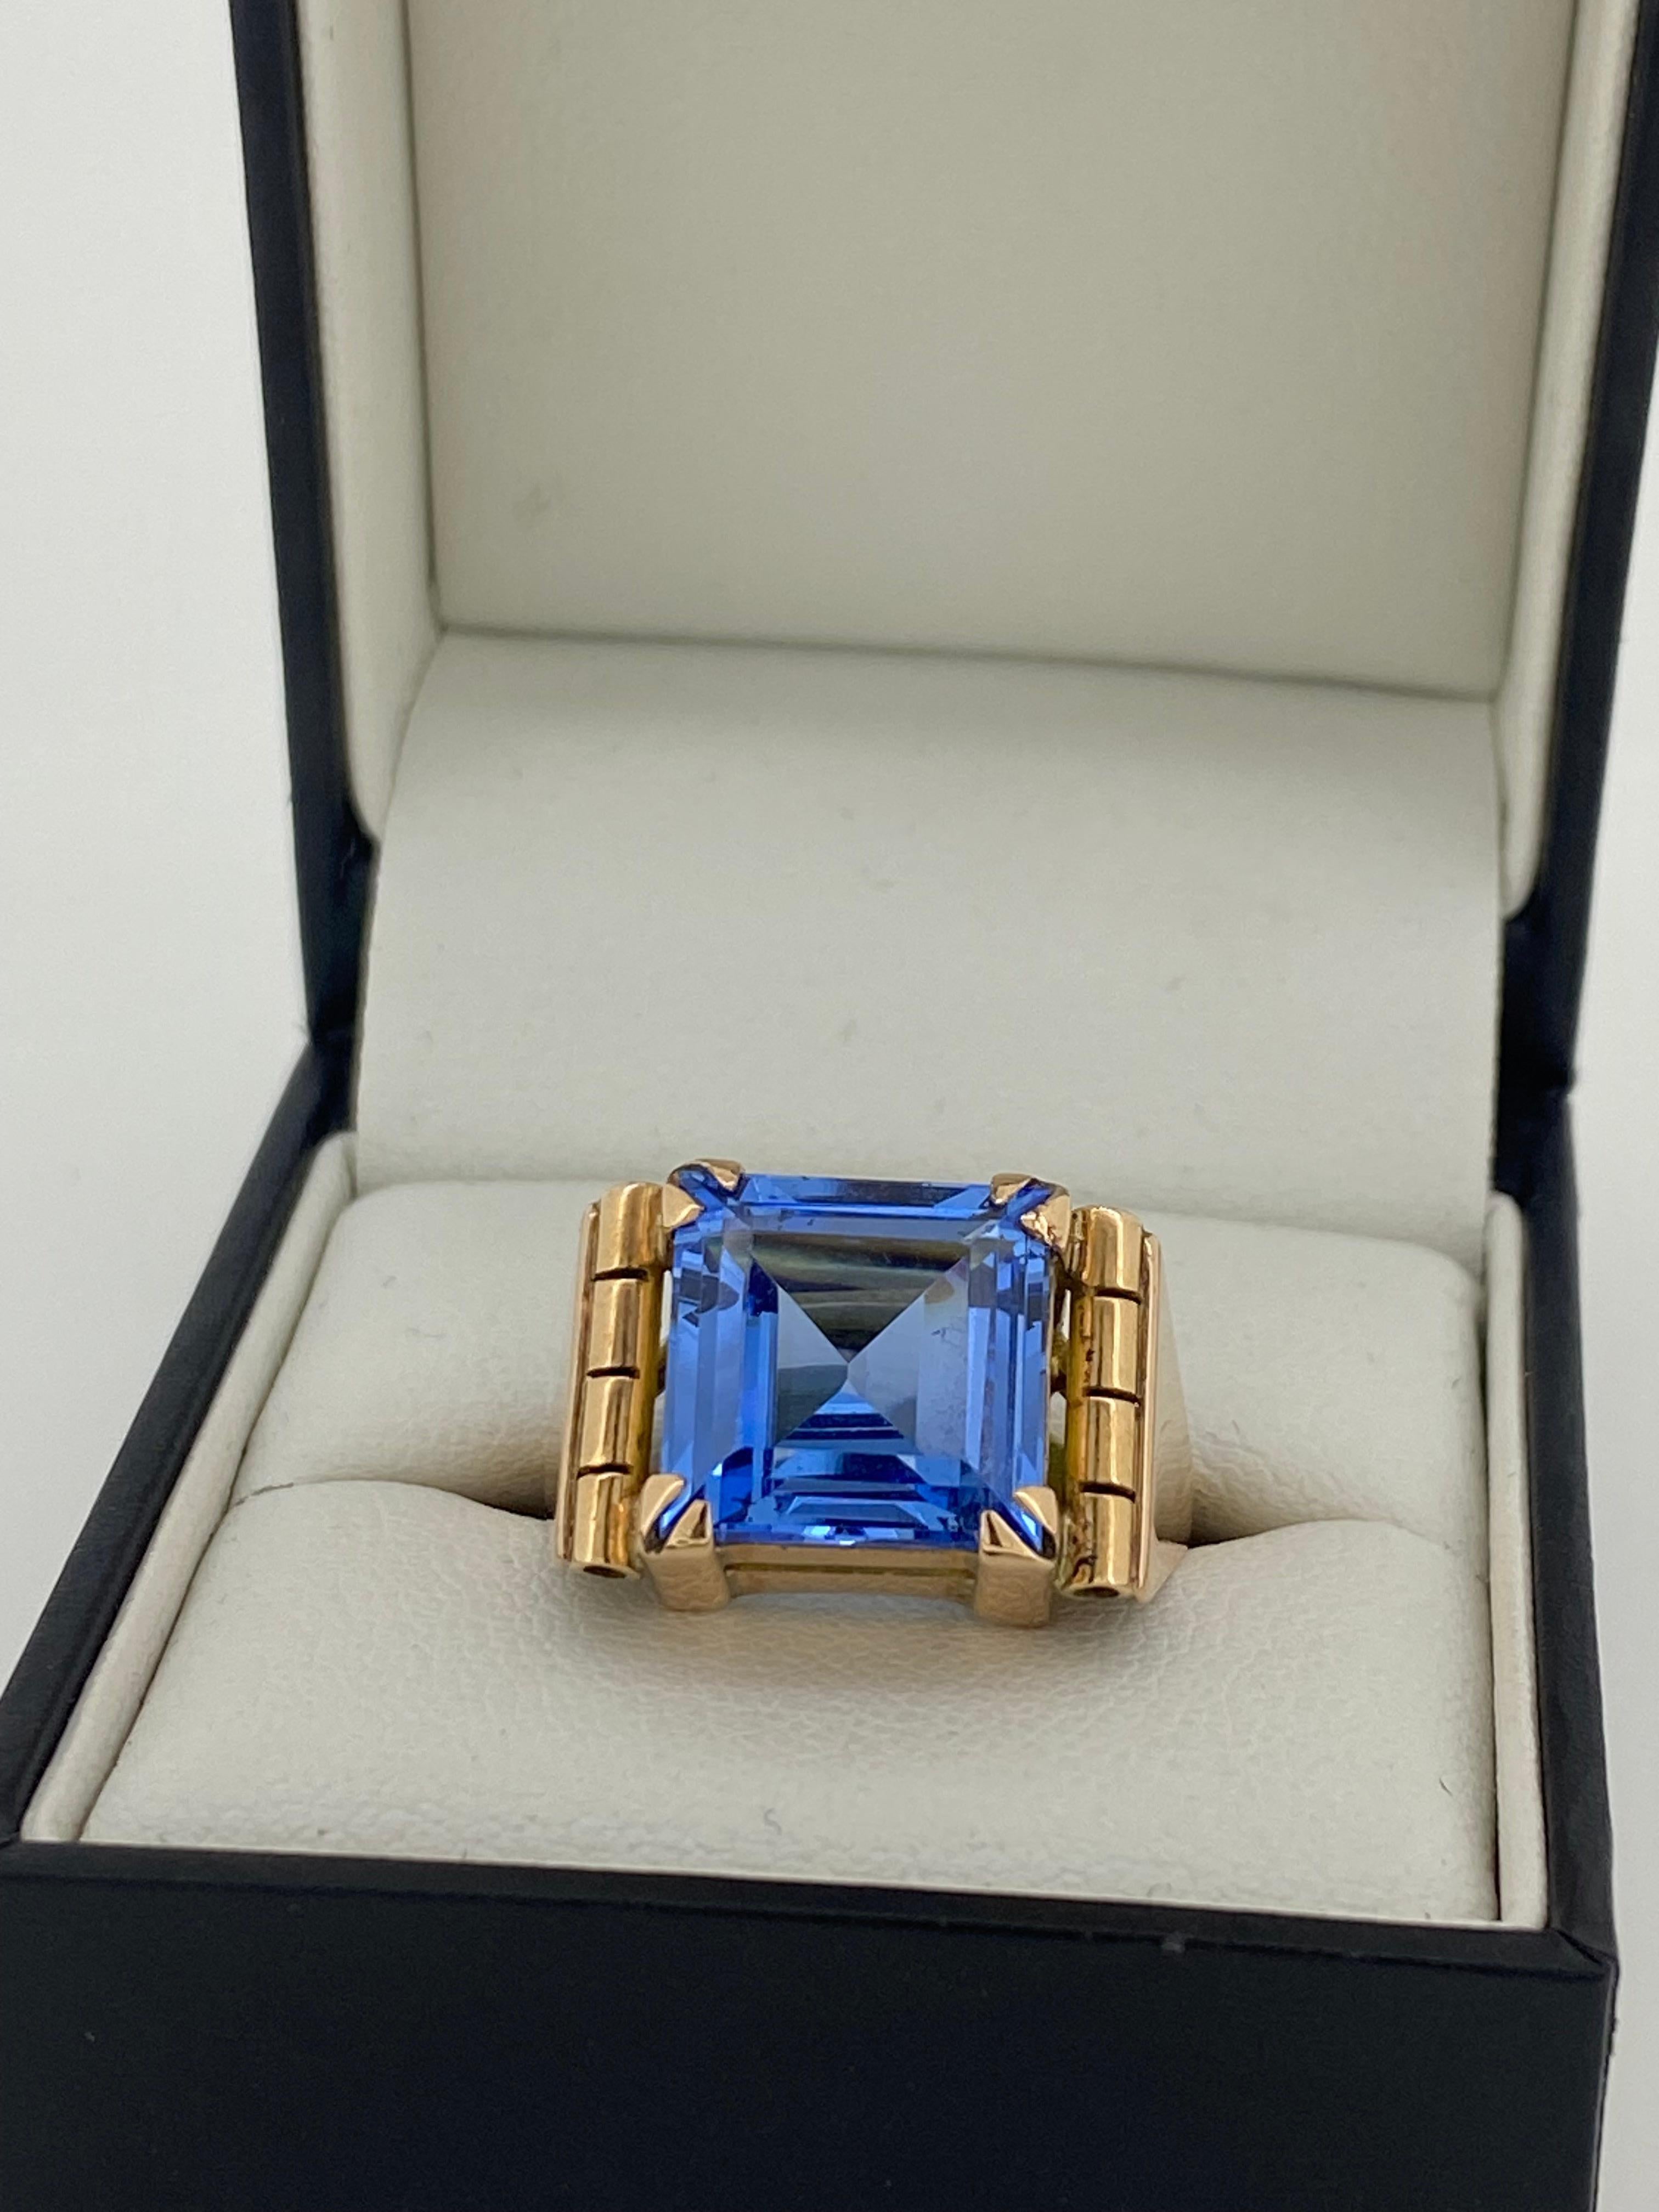 Of an exquisite & comfortable design, 
this mens' retro ring comes from 1950's

Crafted in 9K Yellow Gold 
it's centrally prong-set with a Square Synthetic Sapphire 
of impressive 5.00ct approx.
(11.5mm x 11.5mm)
of vibrant sky blue colour